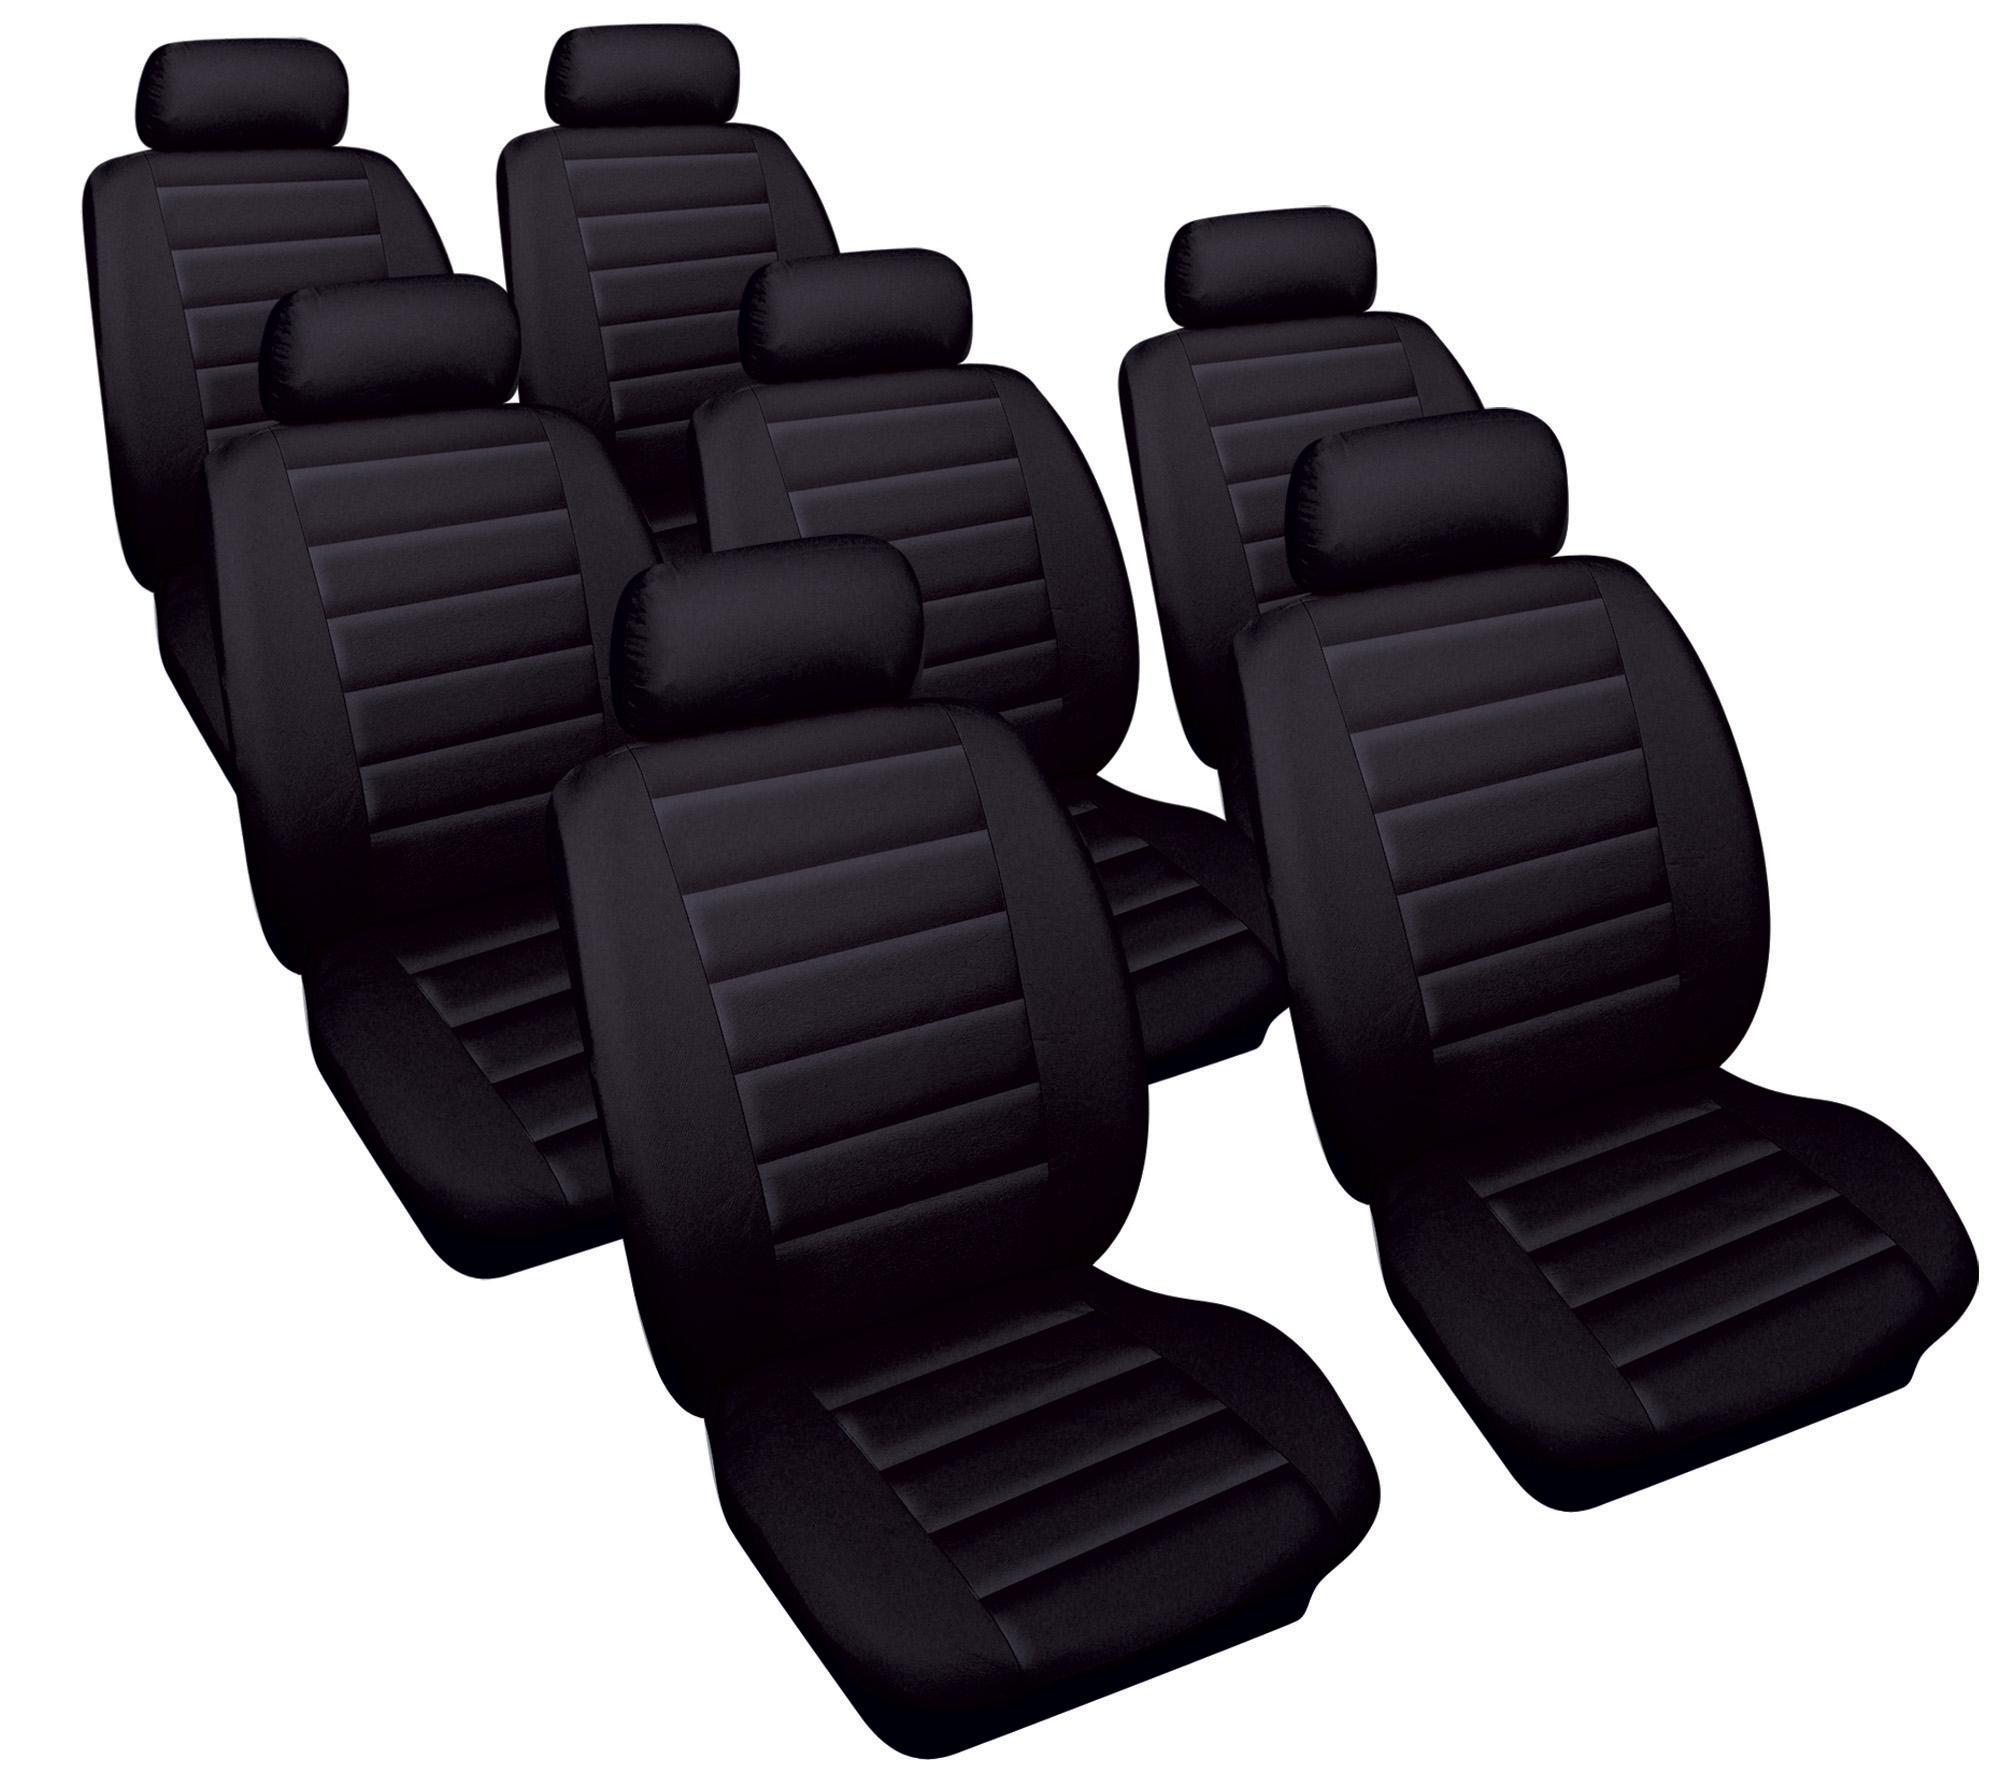 toyota previa seat covers #1